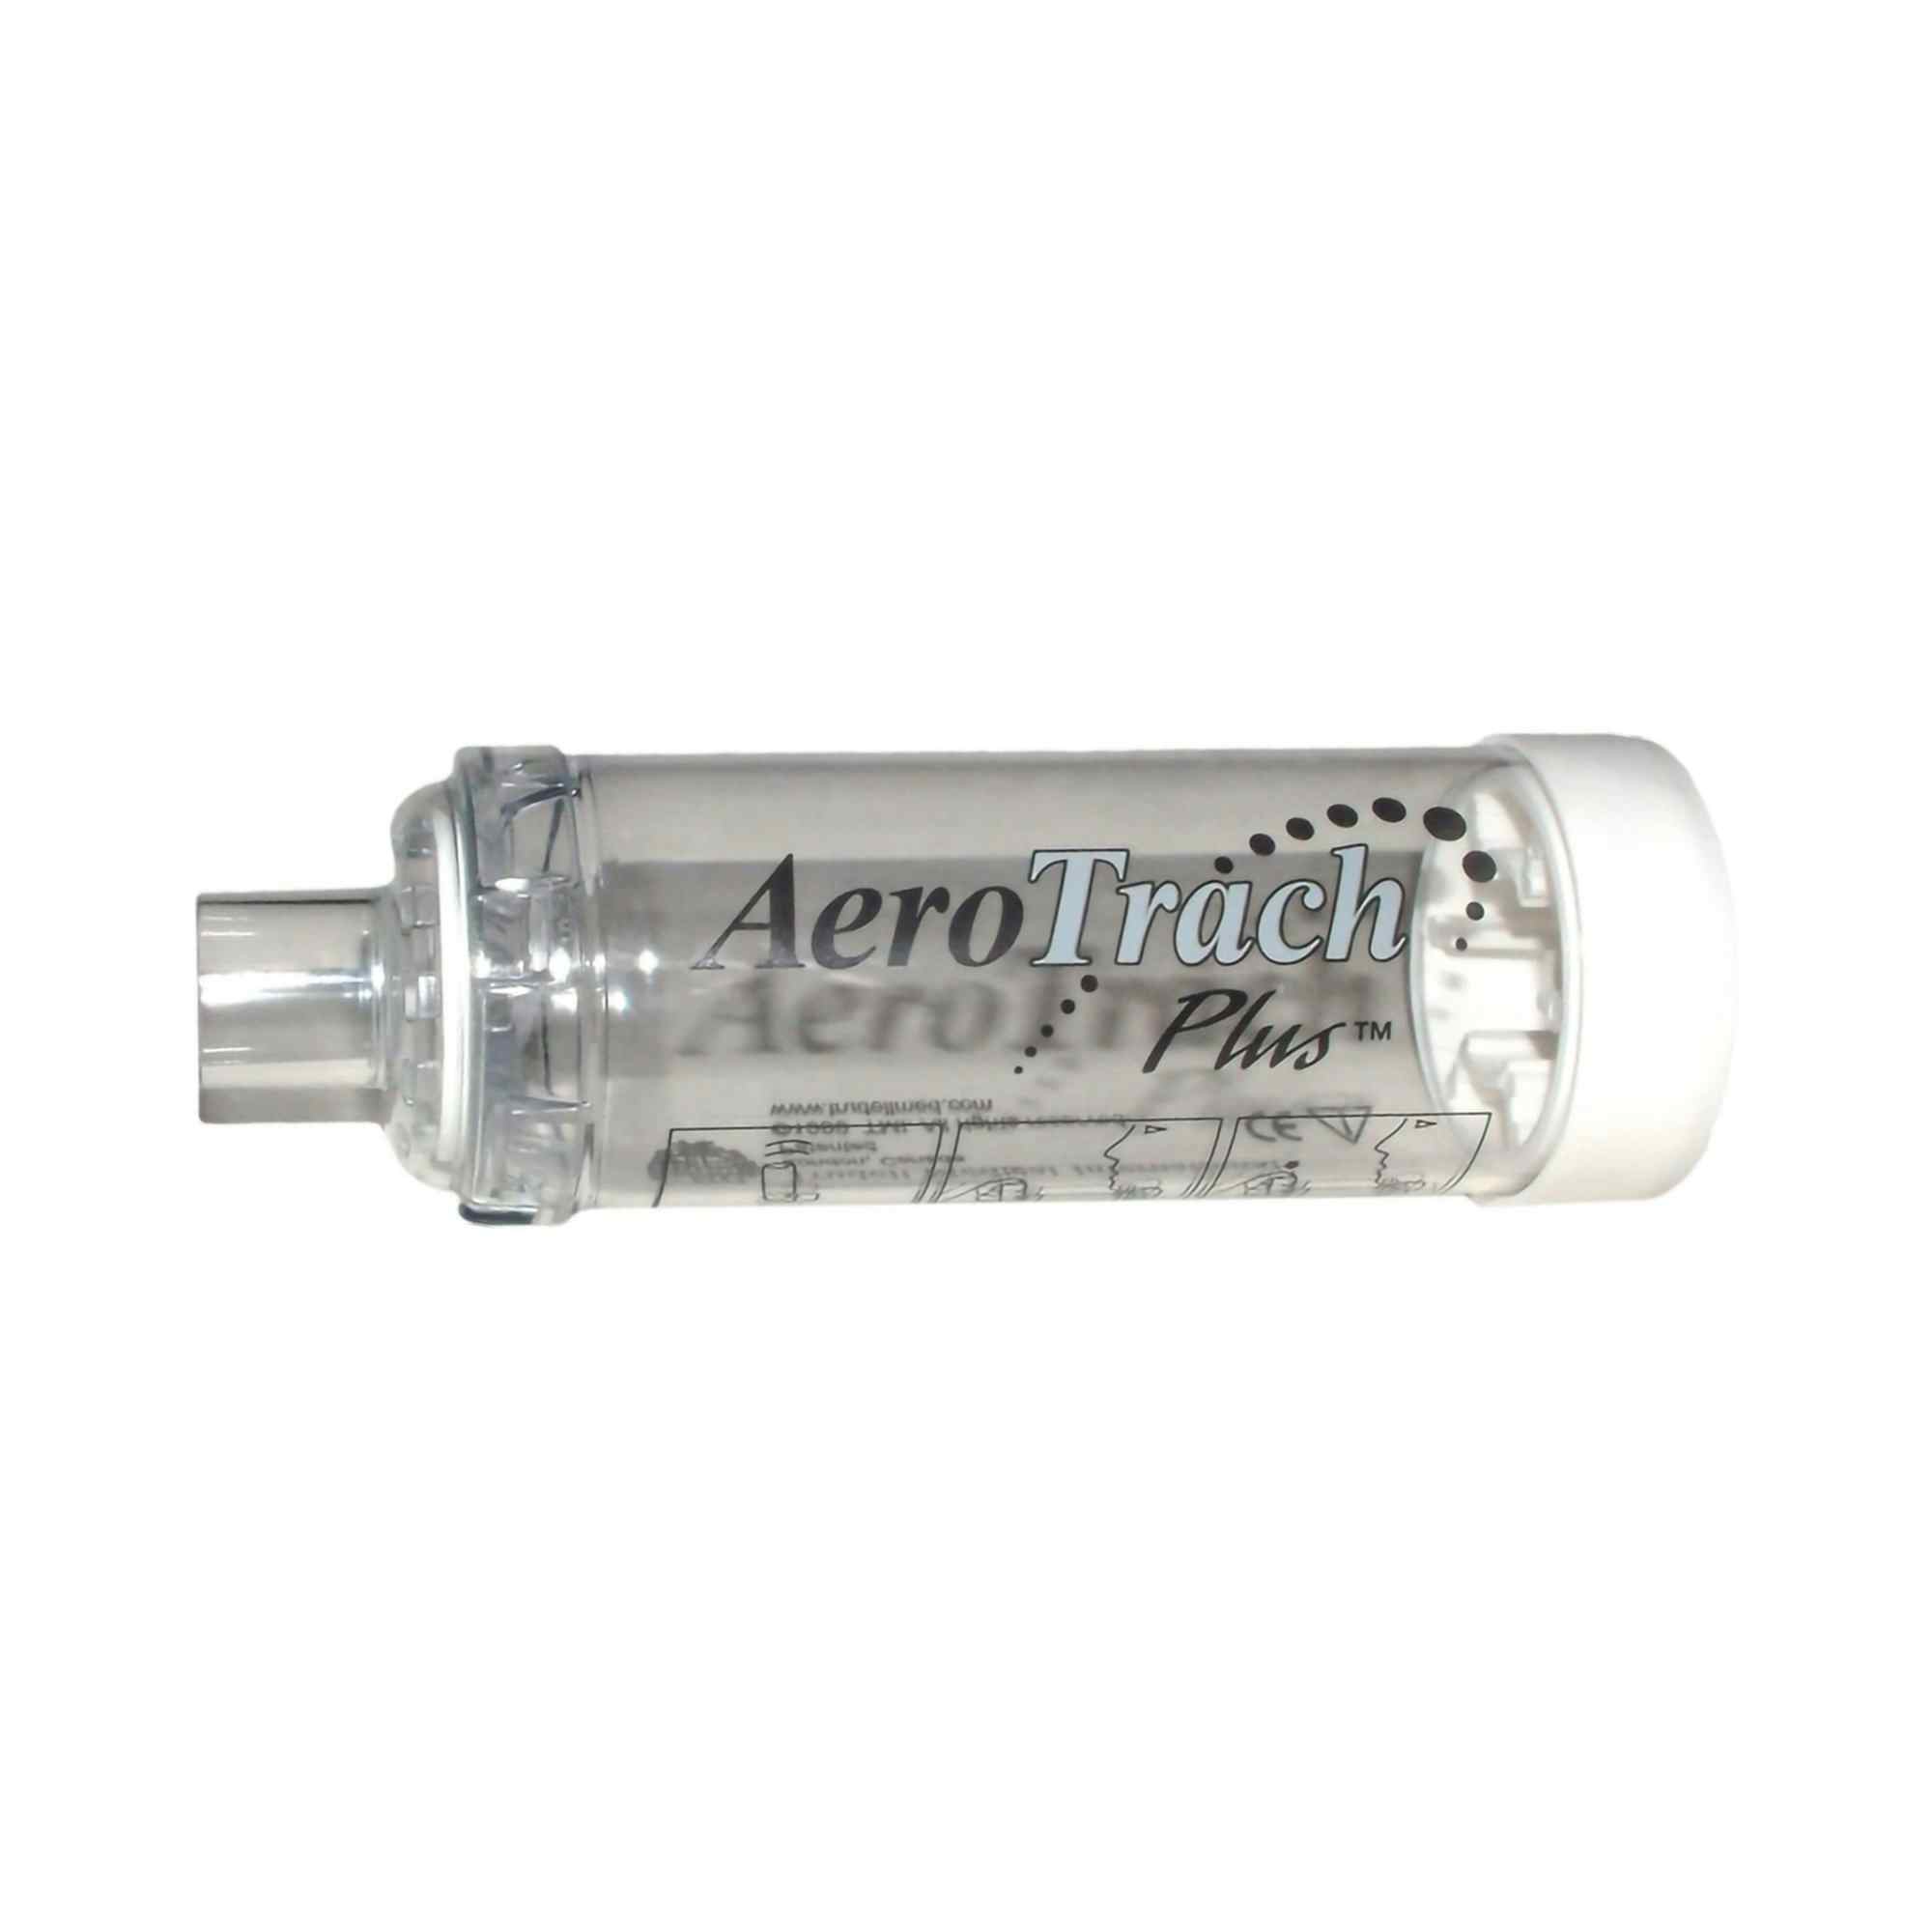 AeroTrach Plus Valved Holding Chamber, 52510, 1 Each